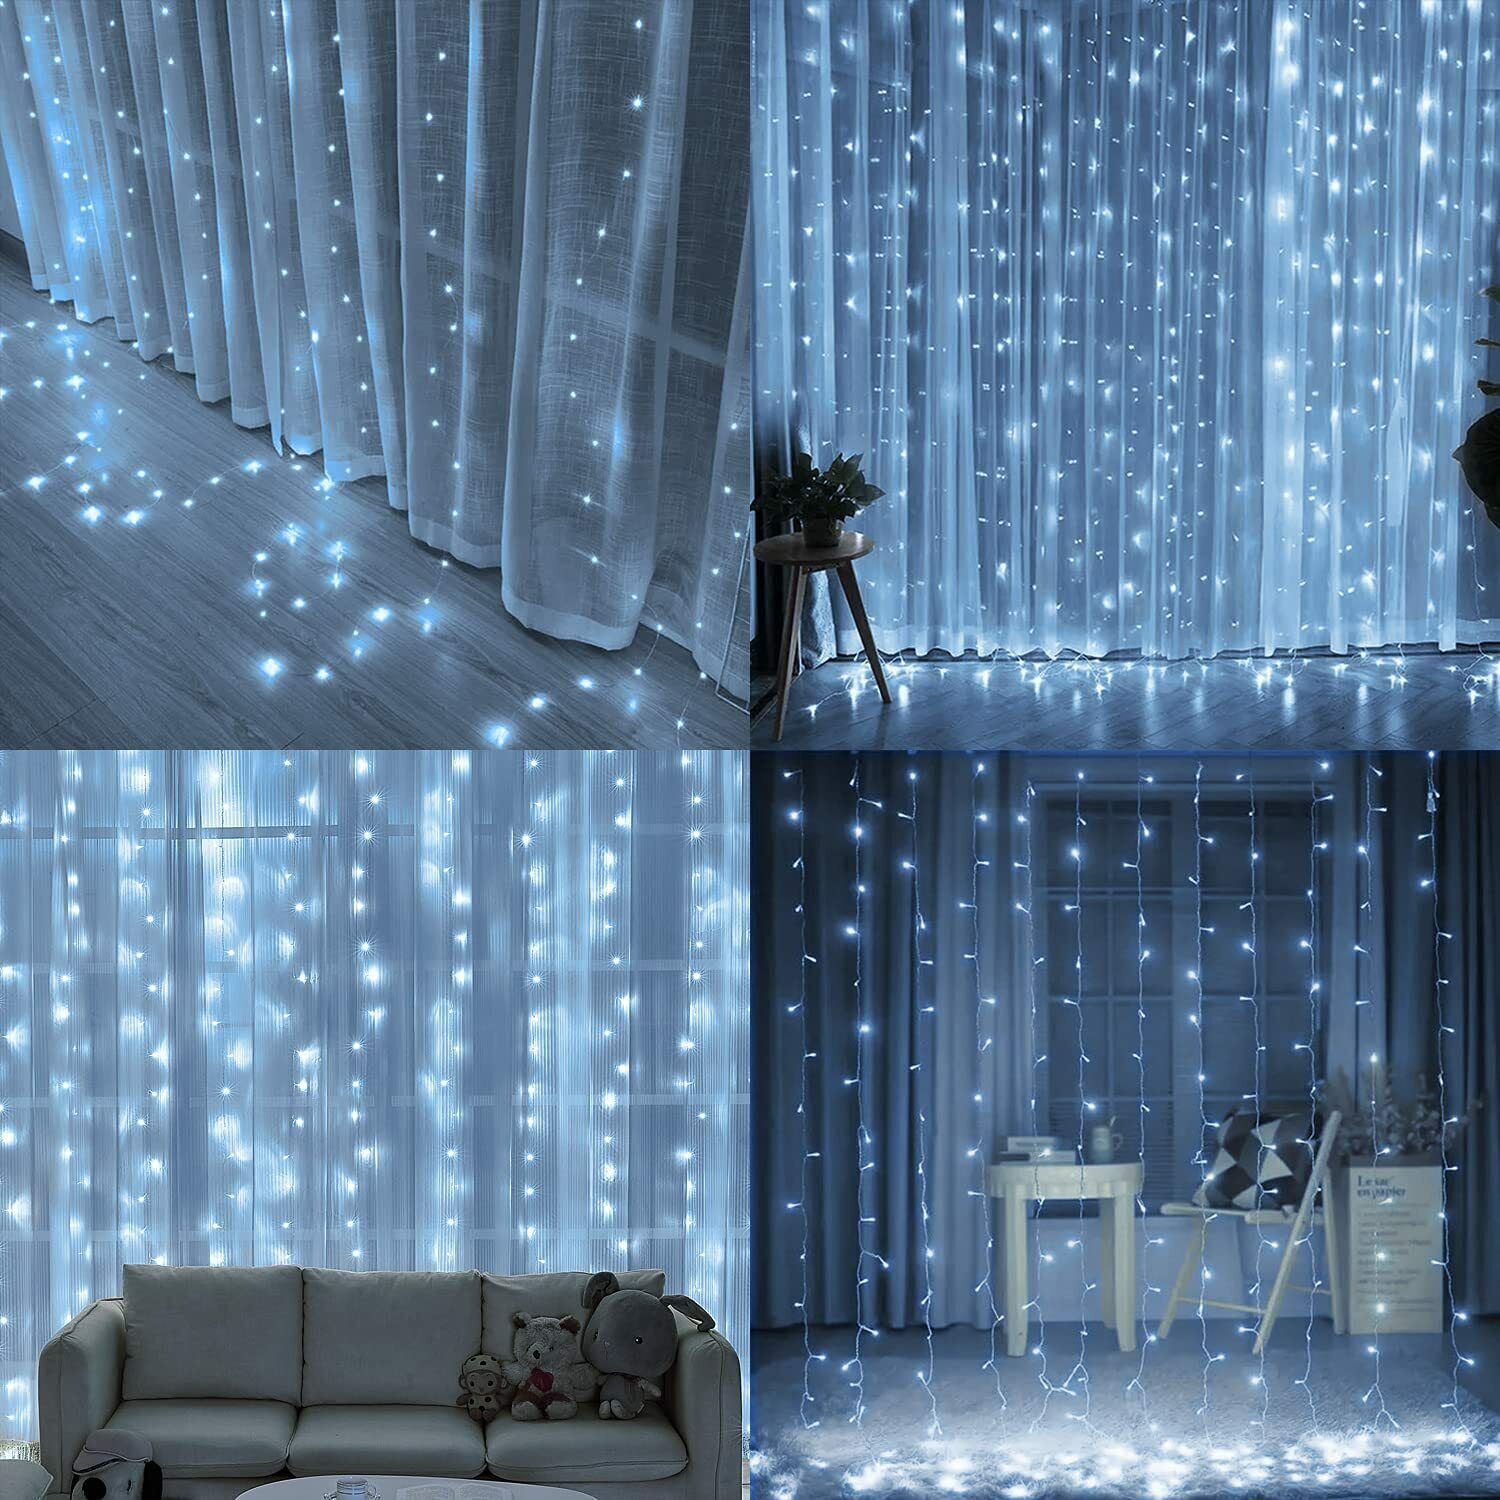 300 LED Curtain Fairy Lights String Indoor/Outdoor Backdrop Wedding Xmas Party